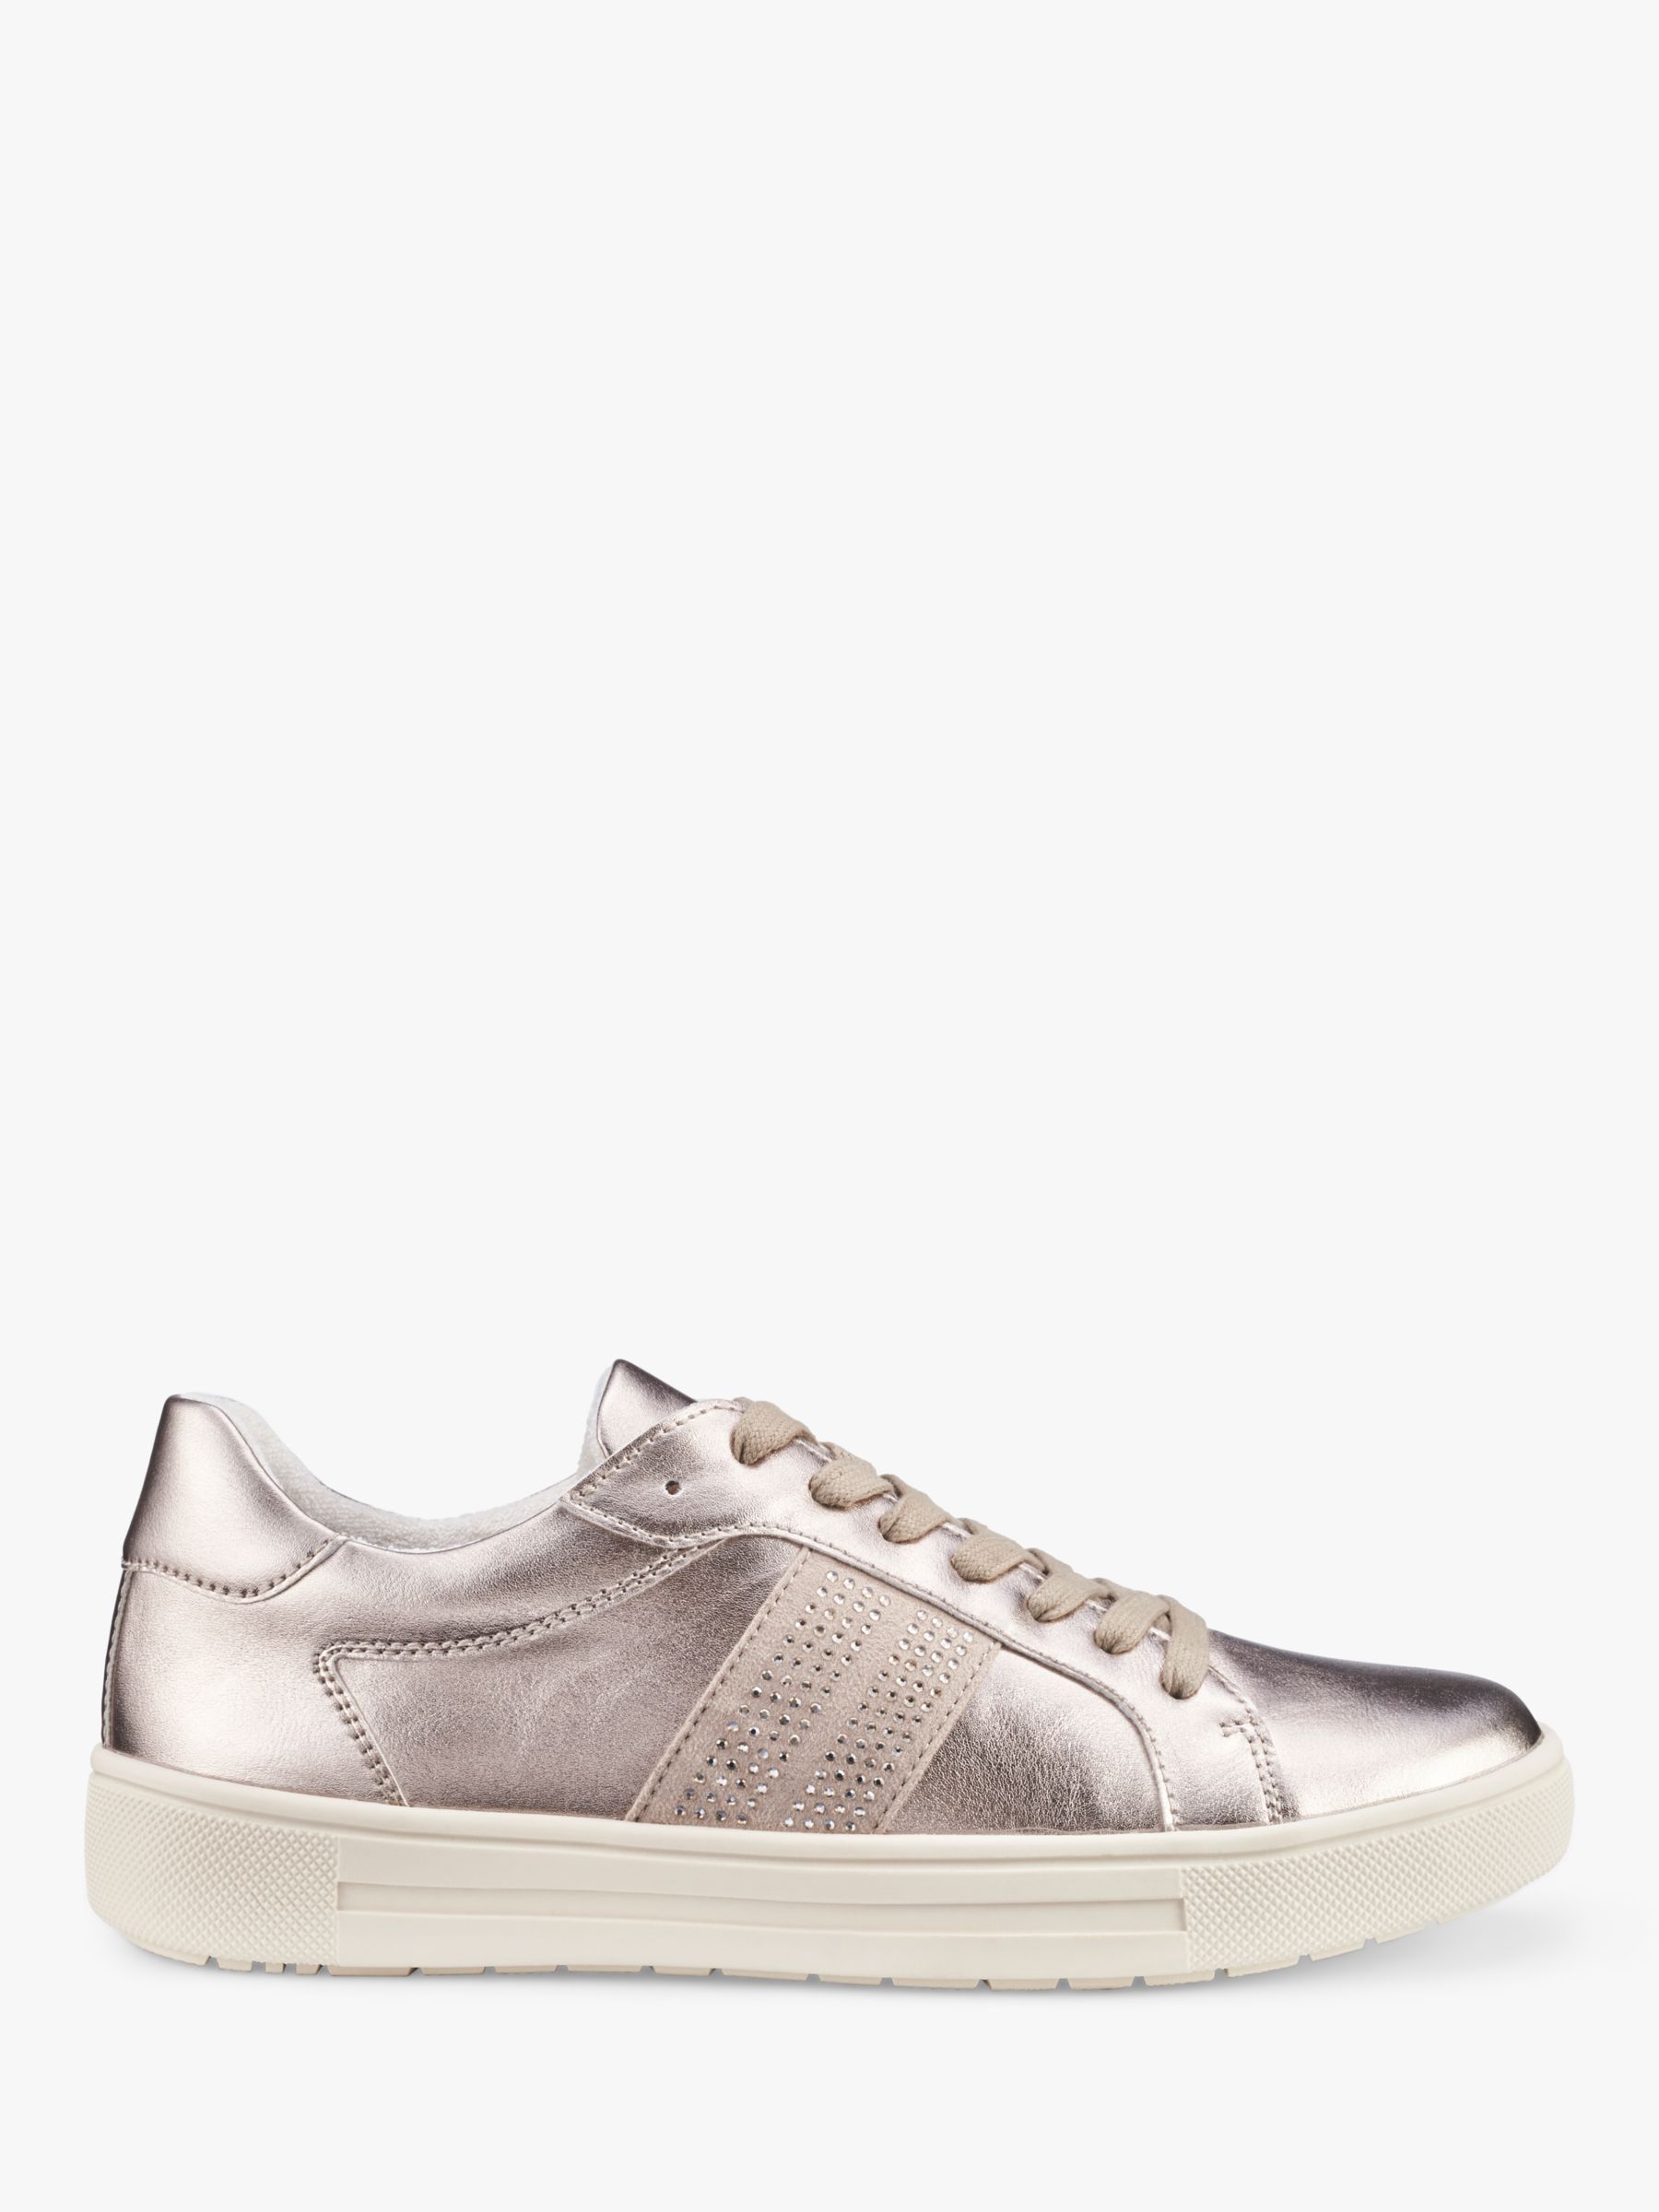 Hotter Libra Sparkle Trainers, Soft Gold at John Lewis & Partners